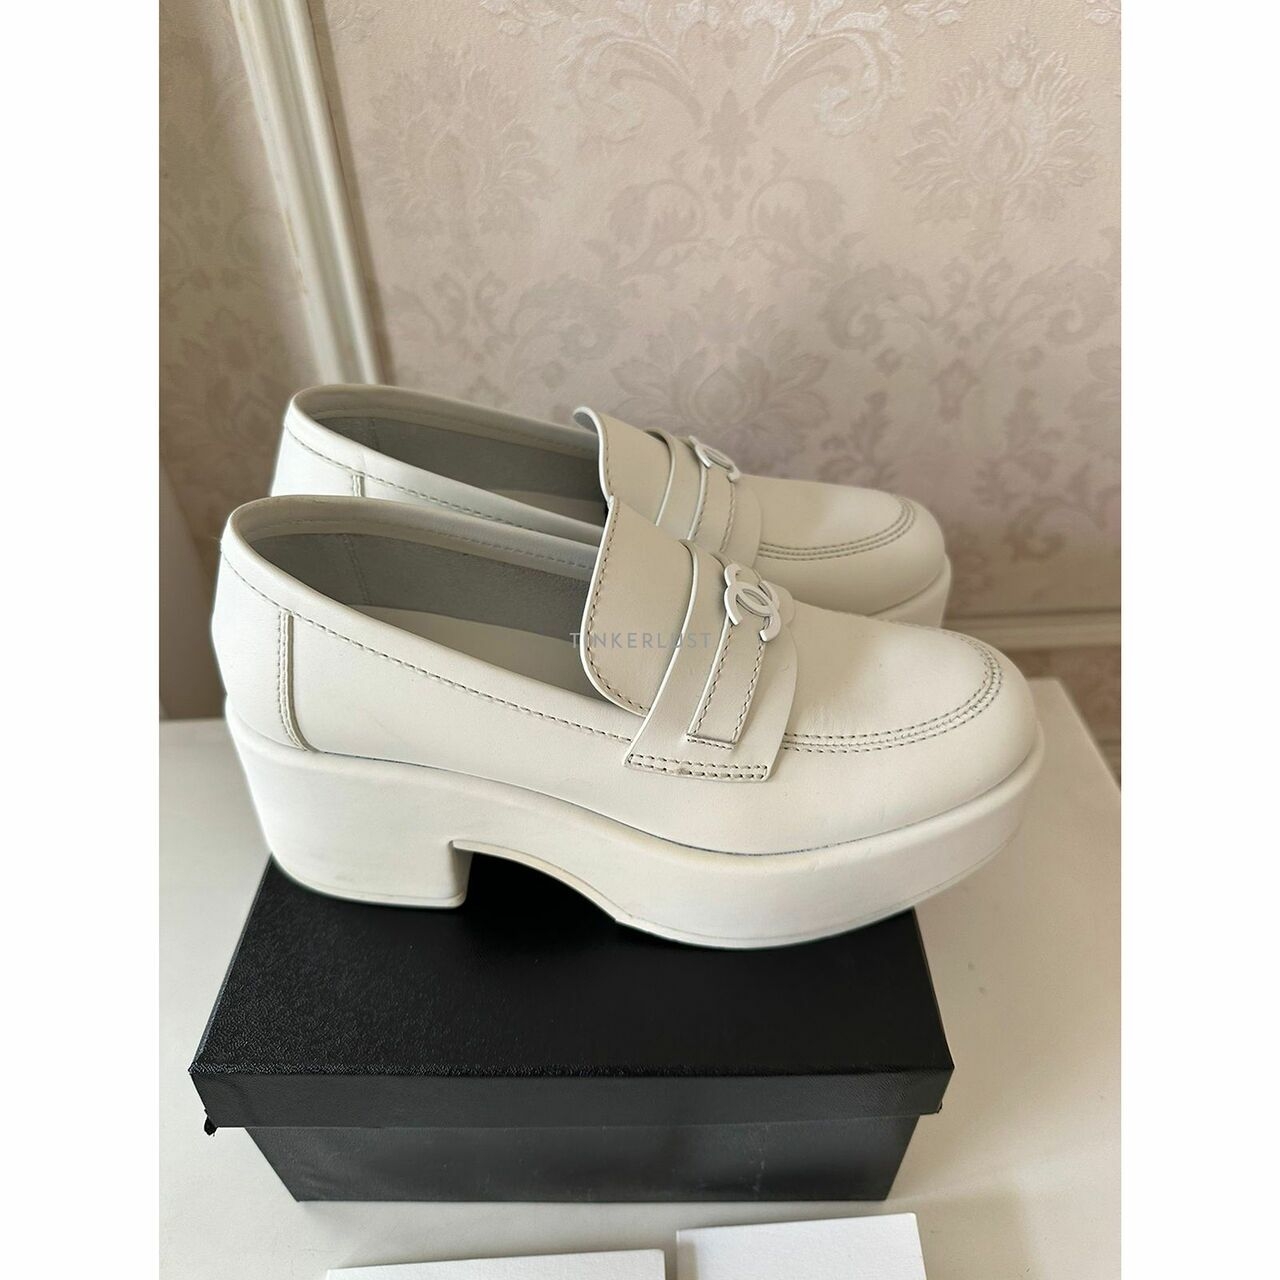 Chanel White Leather CC Platform Loafers Flats